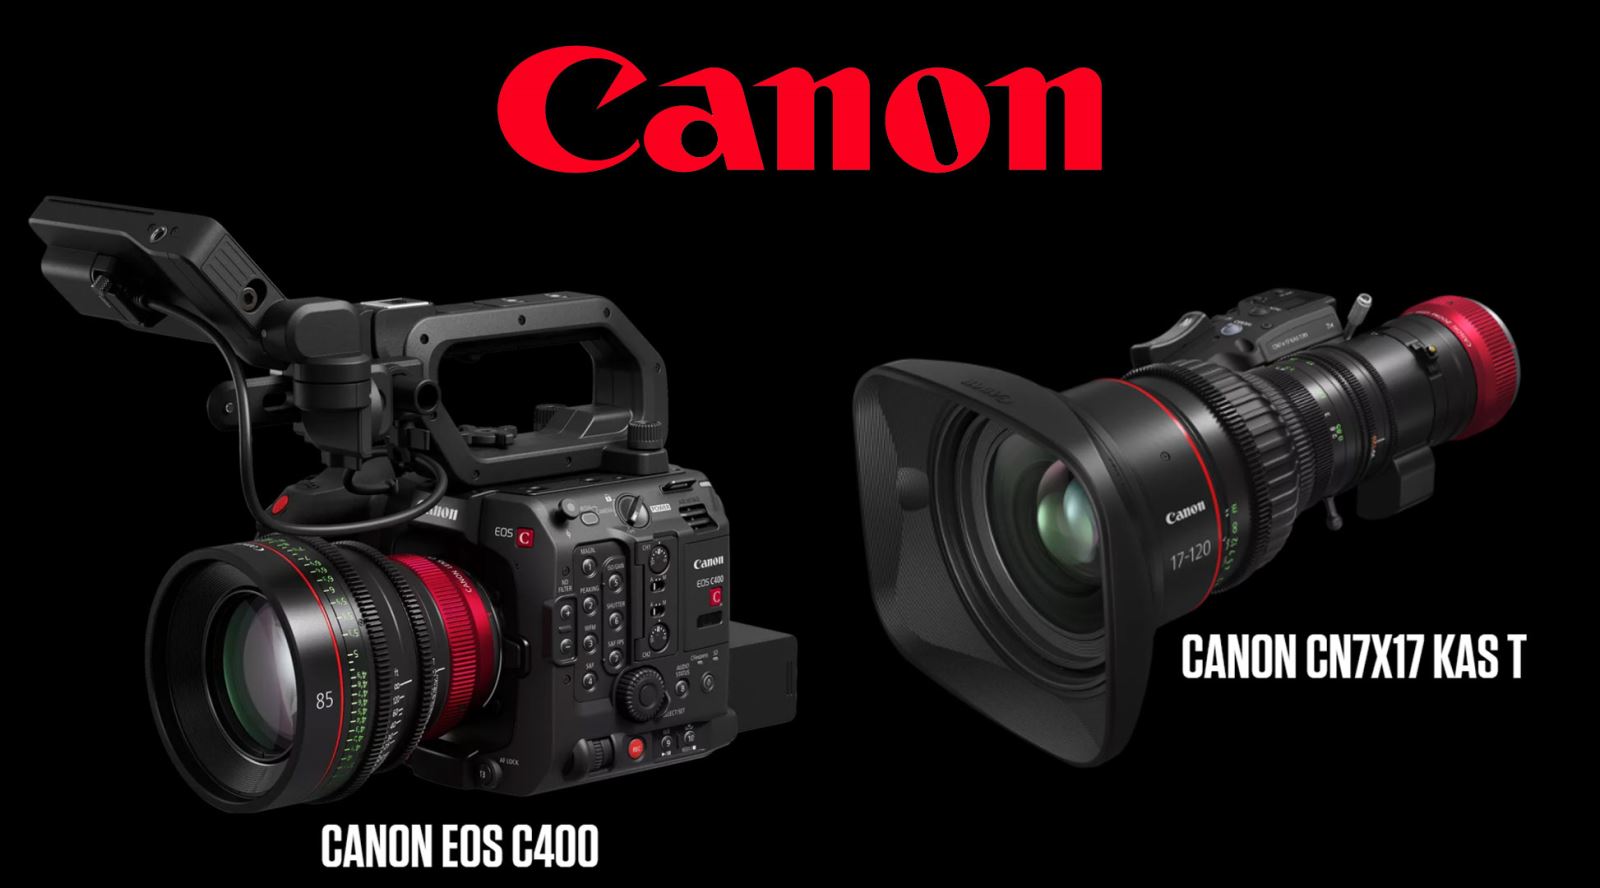 Canon EOS C400 and CN7x17 KAS T Lens